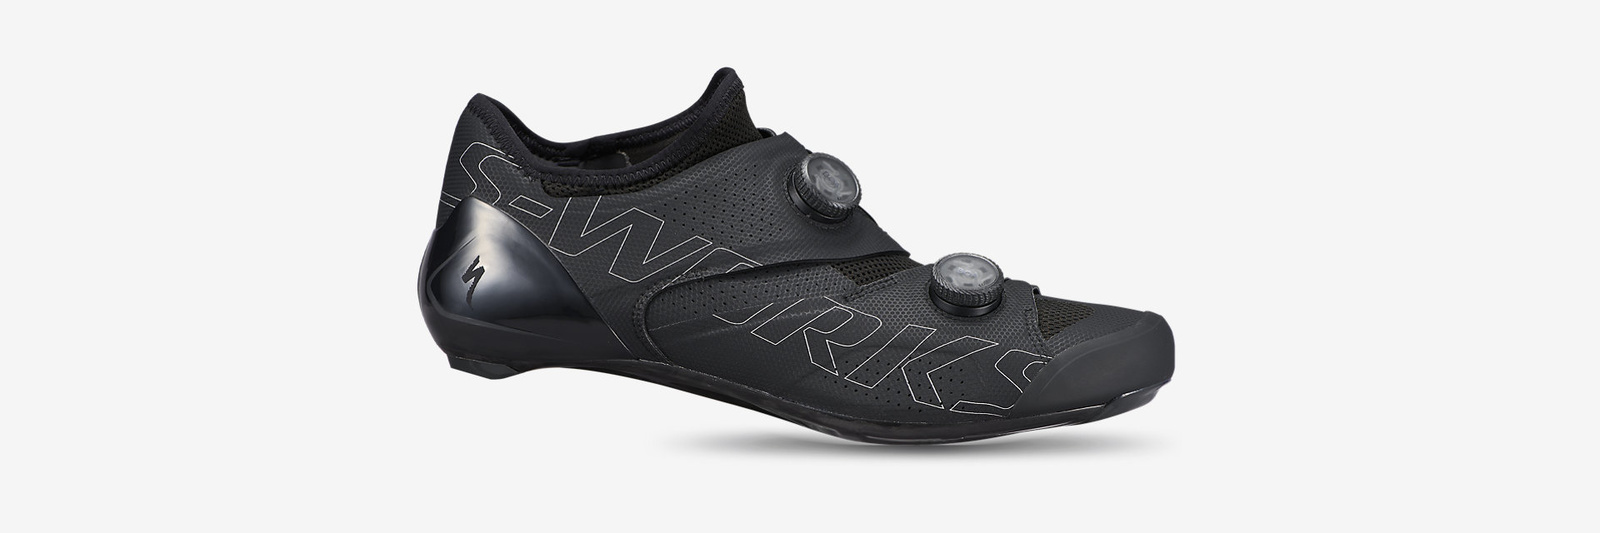 S-Works Ares Road Shoes Black